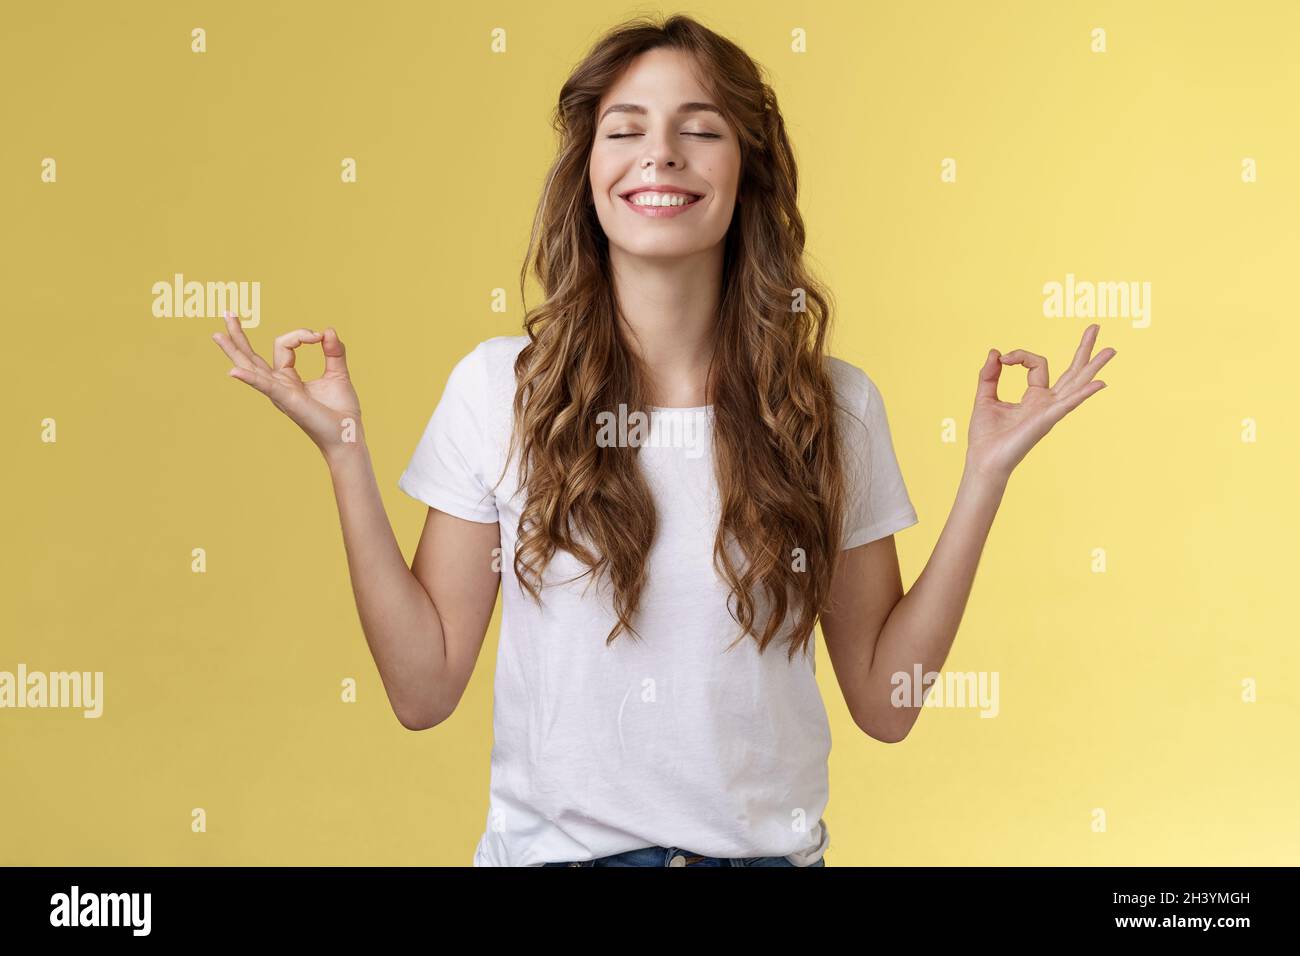 Patience, happiness, wellbeing. Cheerful relieved attractive peaceful relaxed young happy girl breathe inhale air smiling broadl Stock Photo